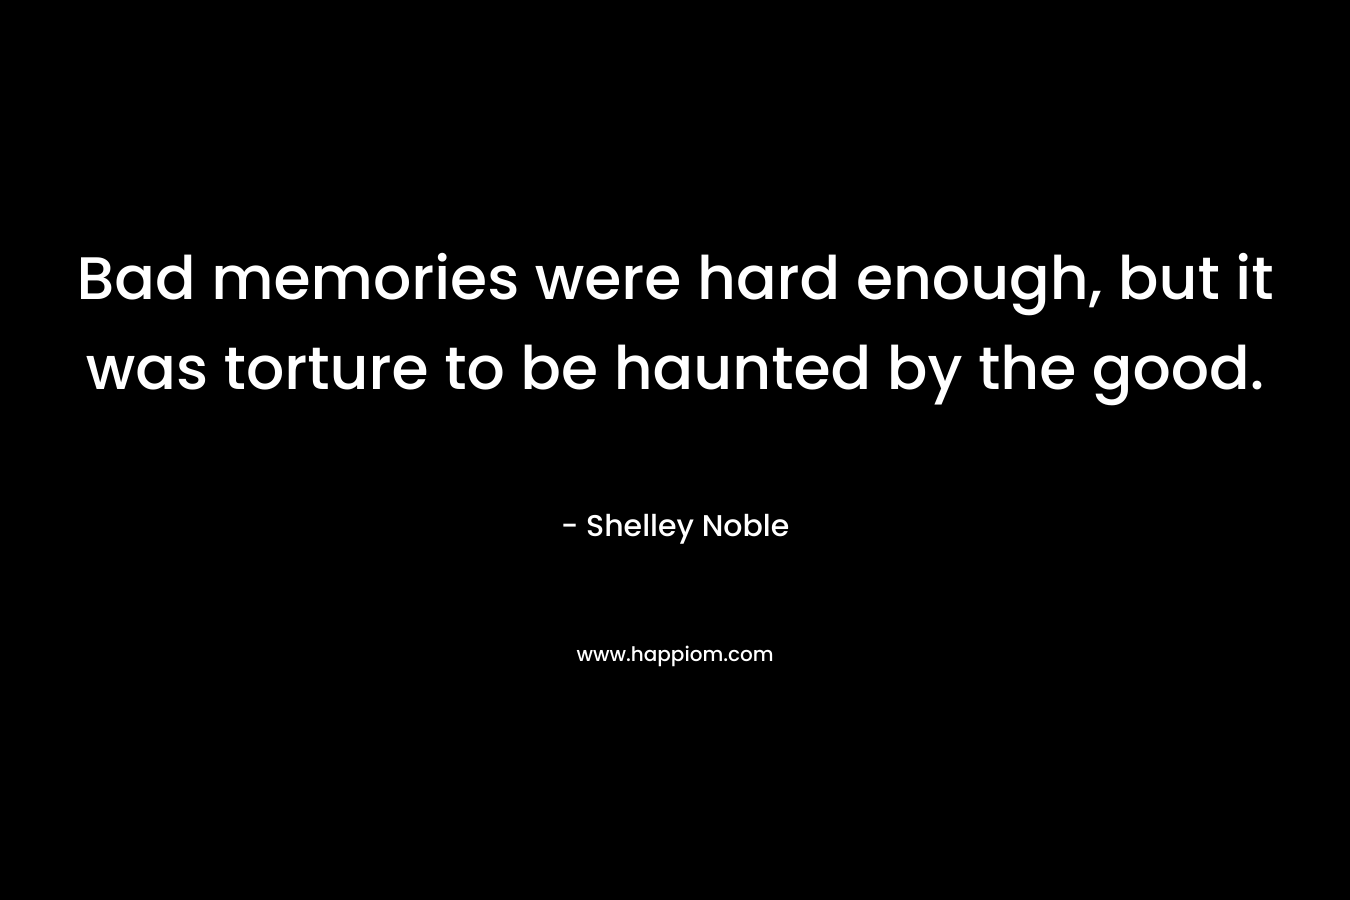 Bad memories were hard enough, but it was torture to be haunted by the good.